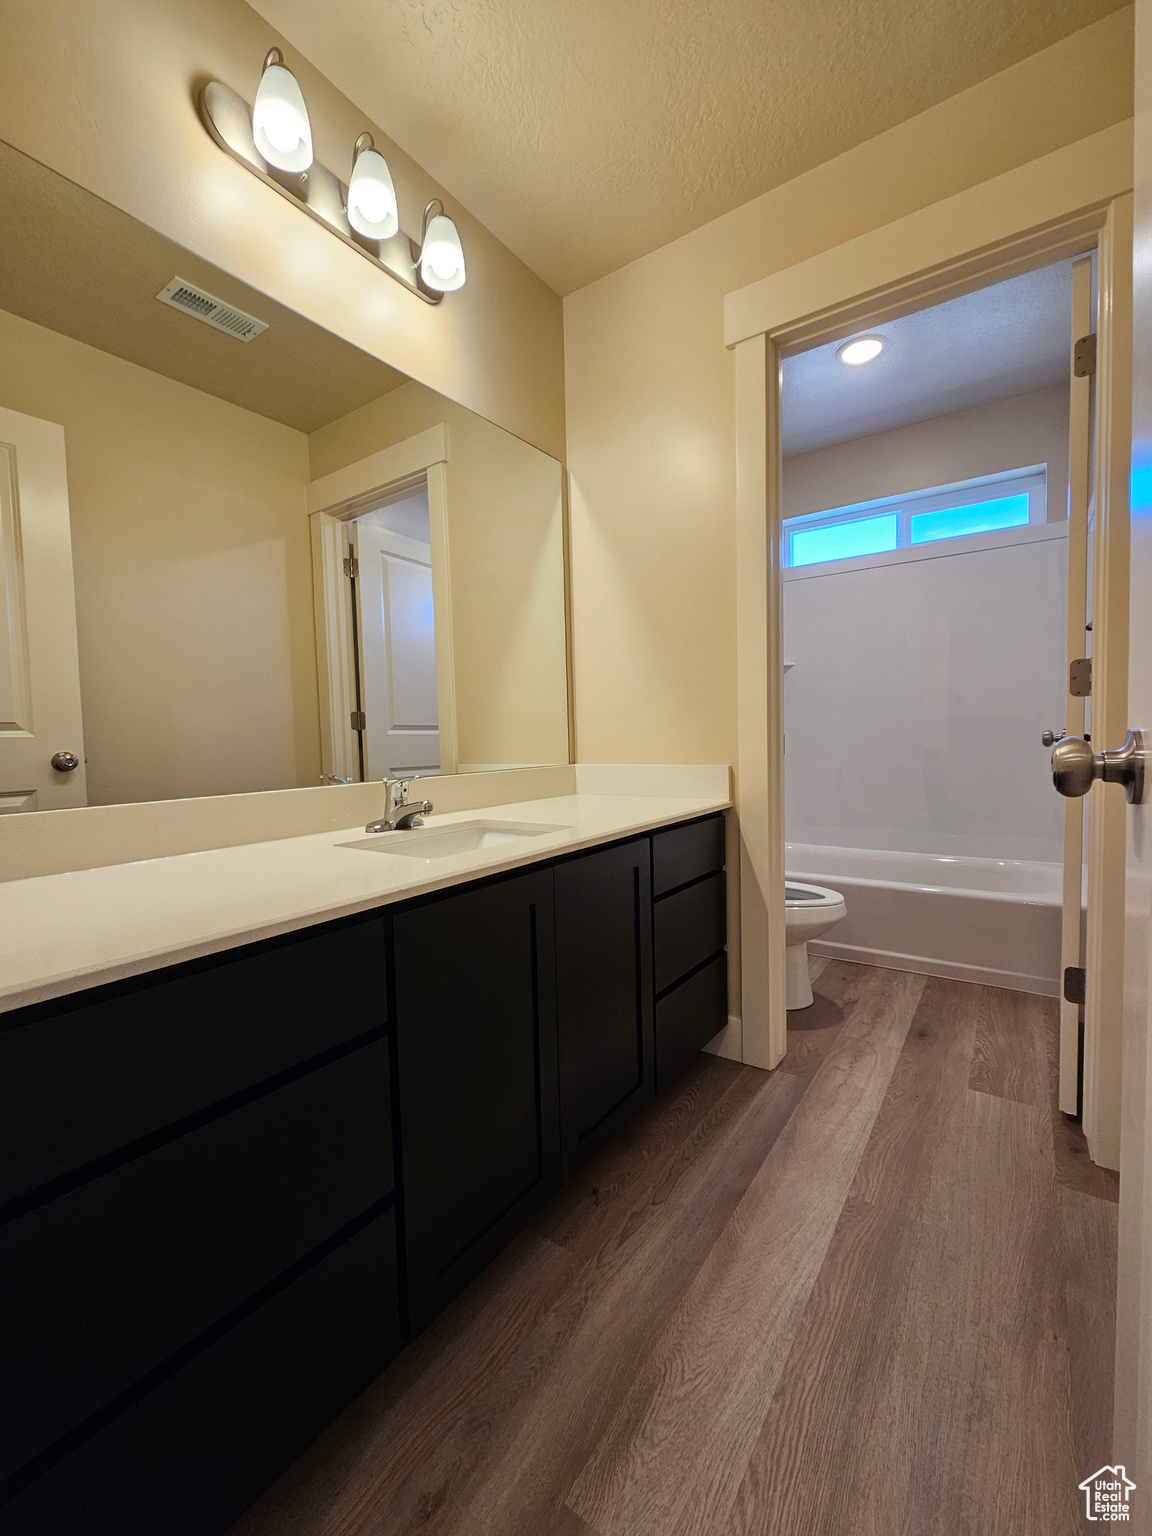 Full bathroom featuring vanity, hardwood / wood-style flooring, shower / bath combination, toilet, and a textured ceiling